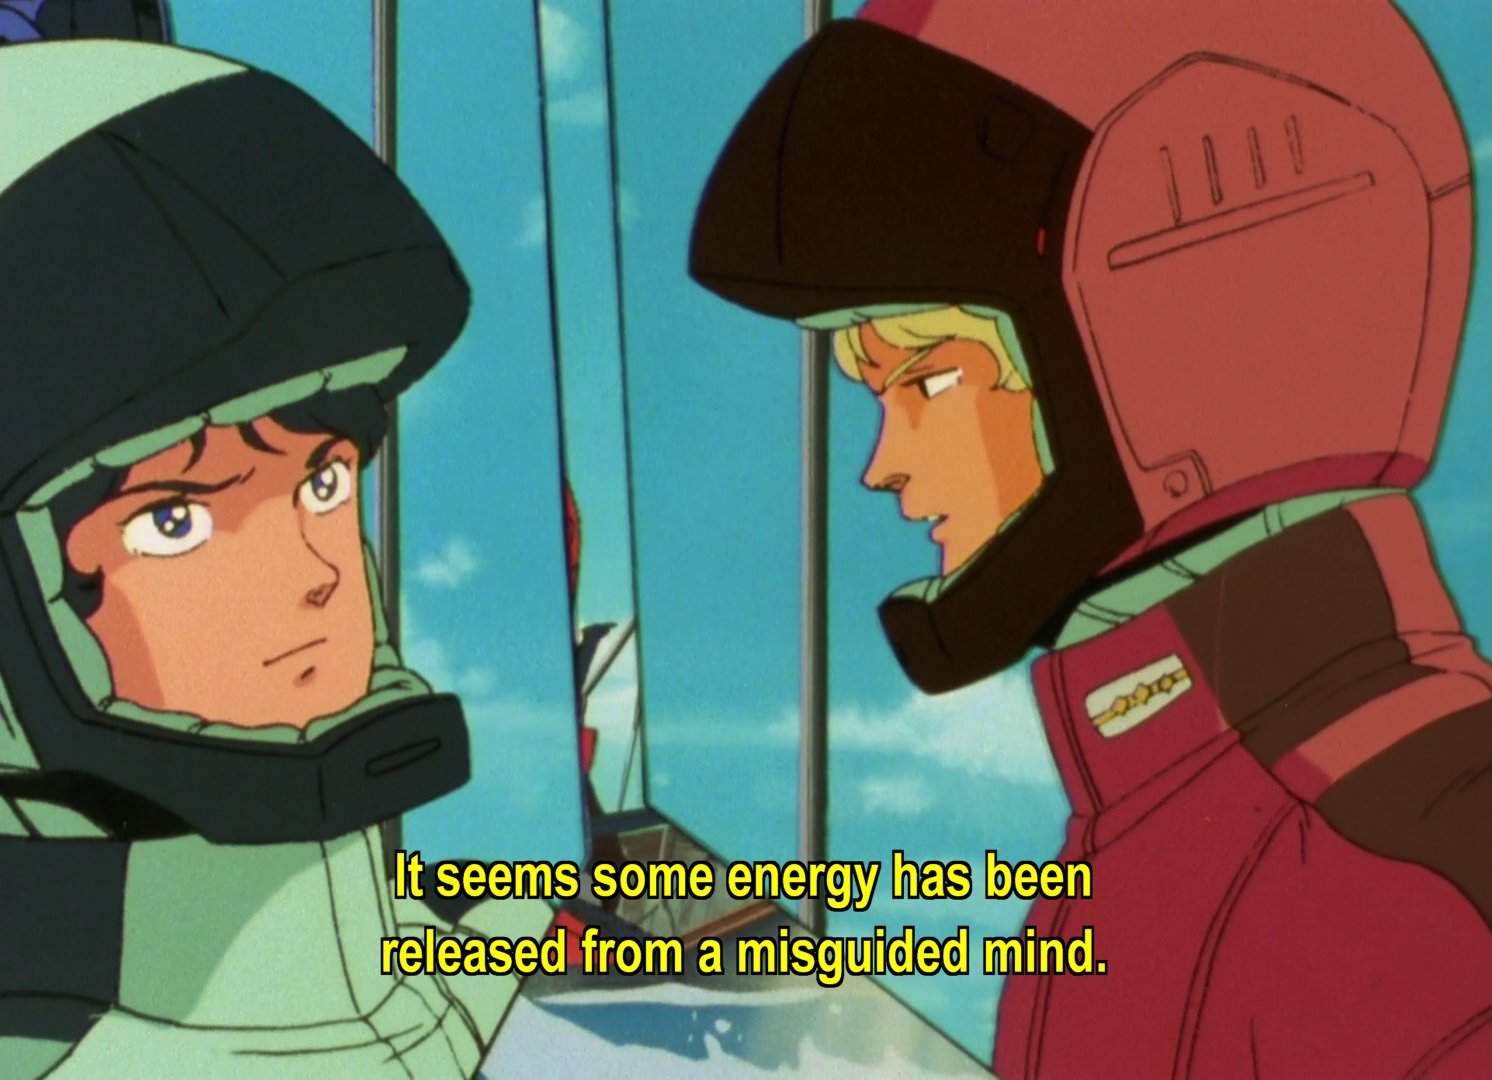 Lt Quattro to Kamille: It seems some energy has been released from a misguided mind.